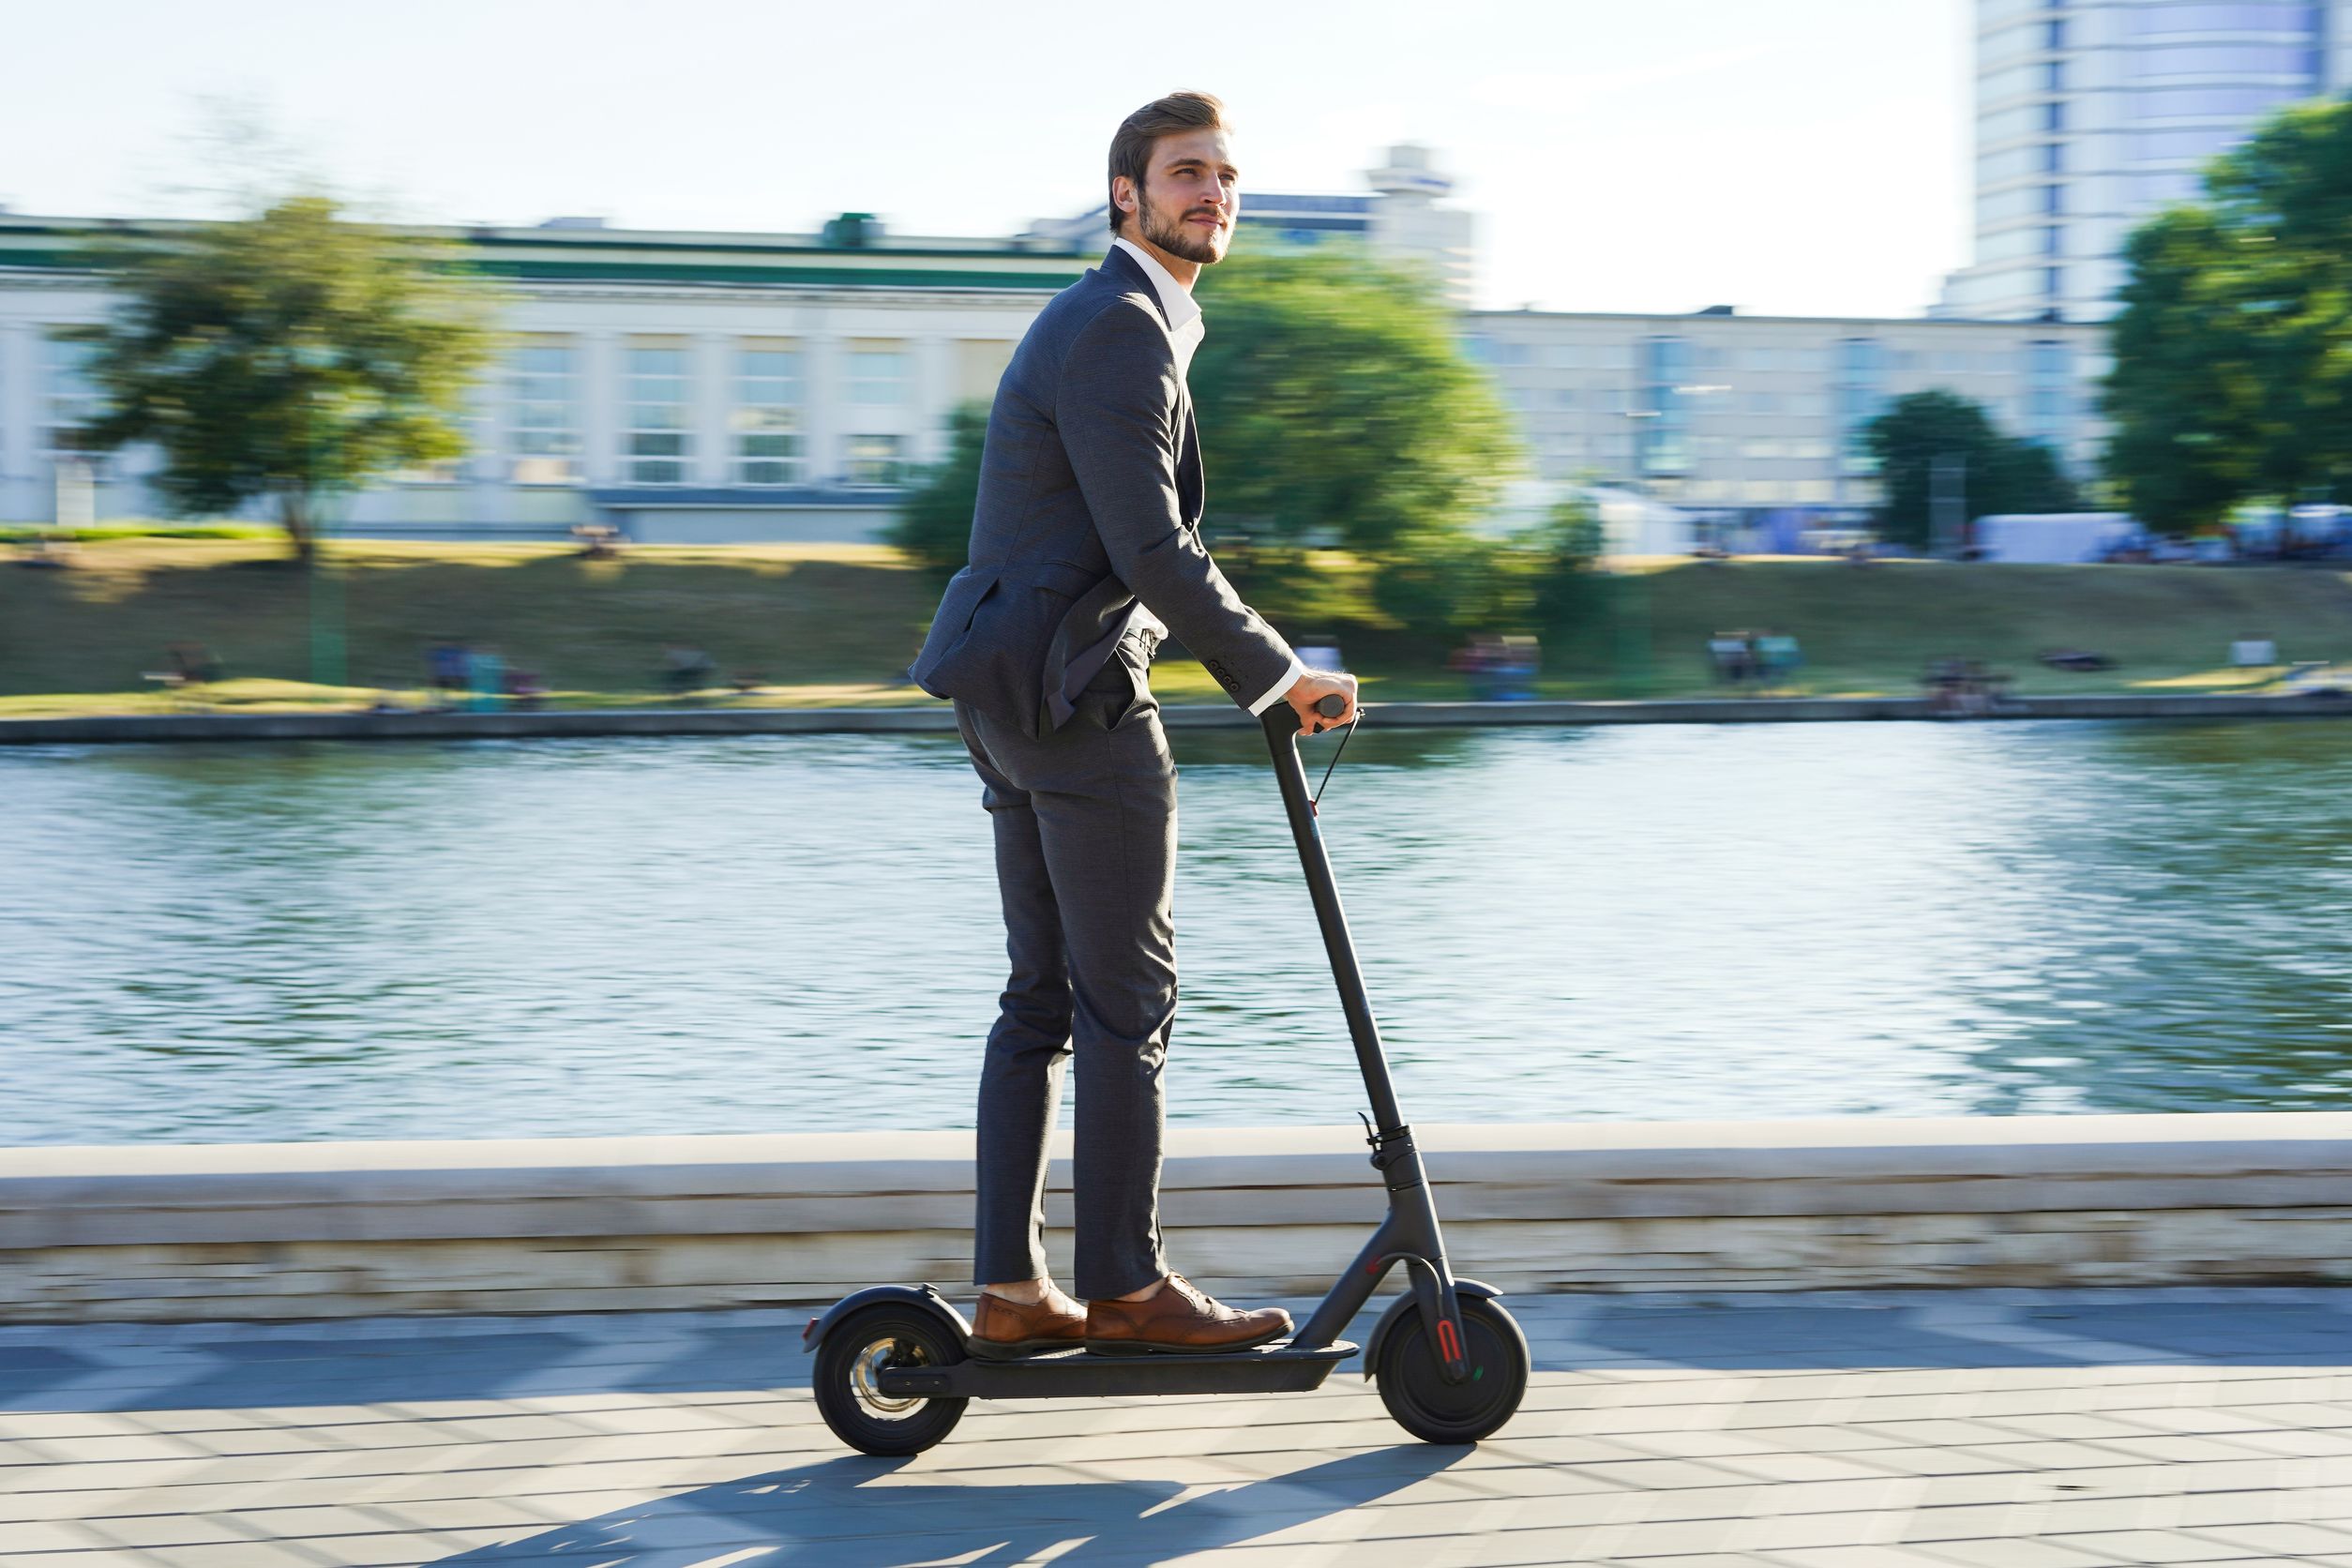 Business man on e-scooter